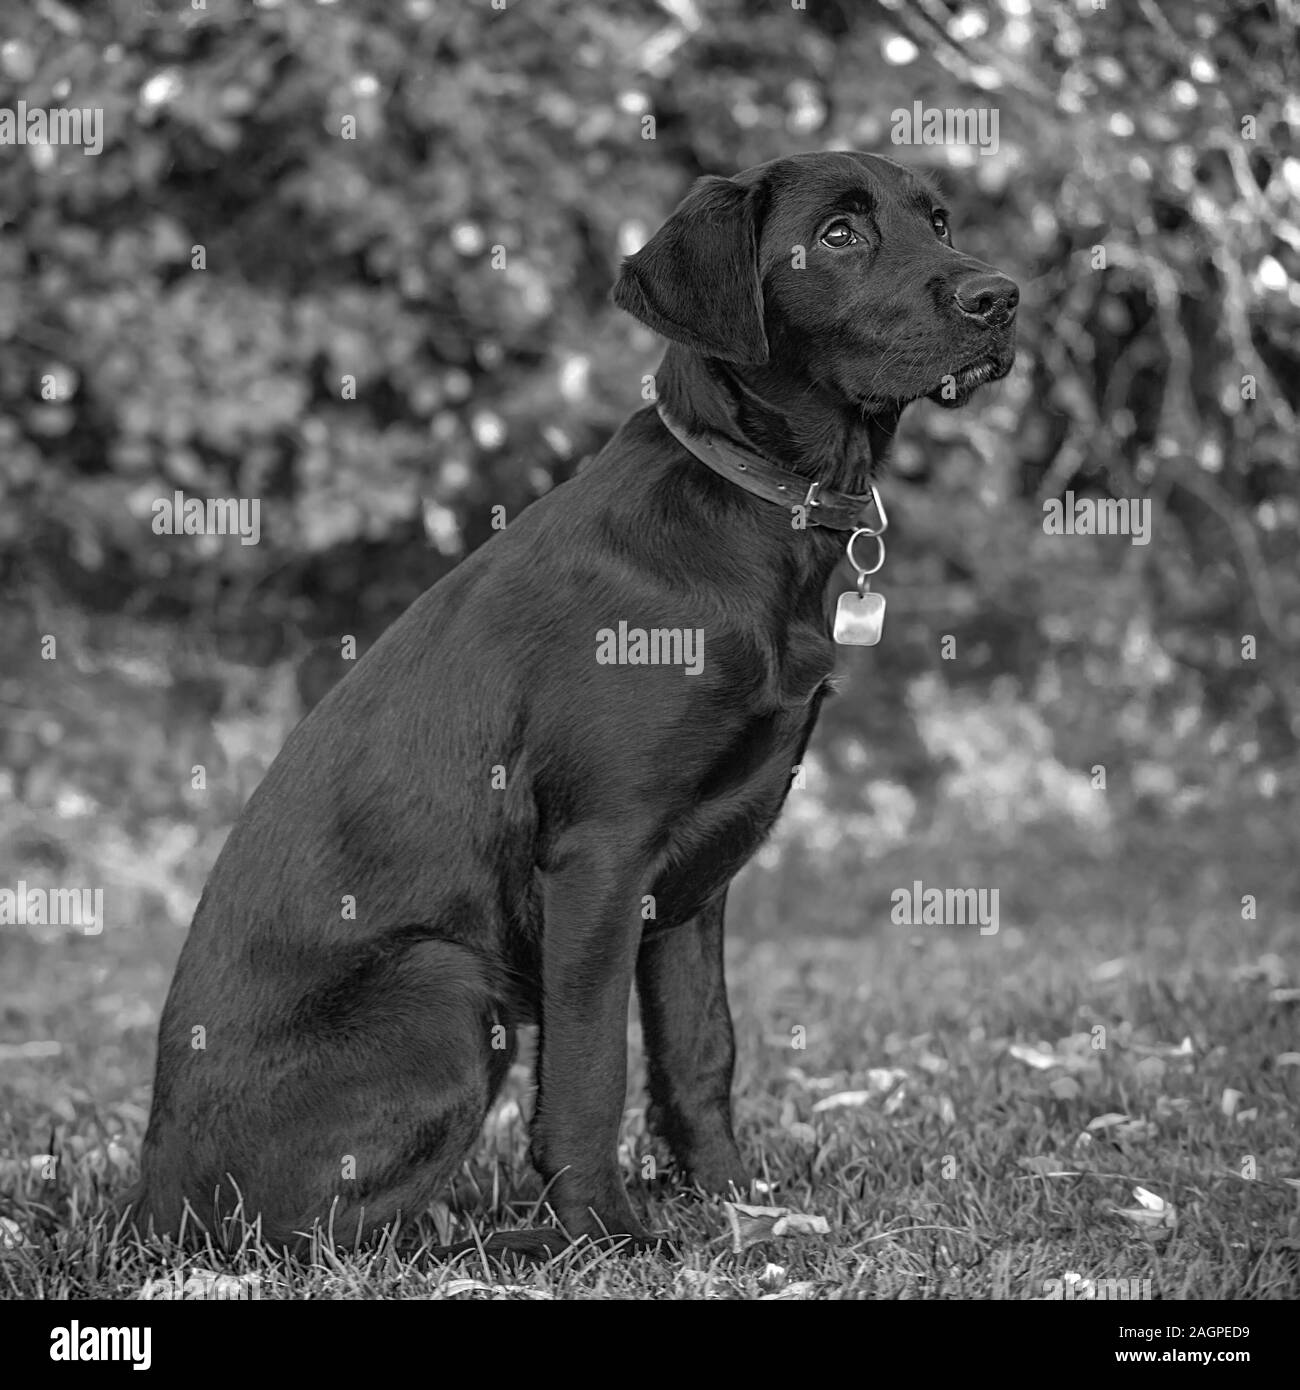 Against a blurred soft-focussed background, a young Labrador sits ready during outdoor training, eyes bright and fixed, apprehending the next command. Stock Photo